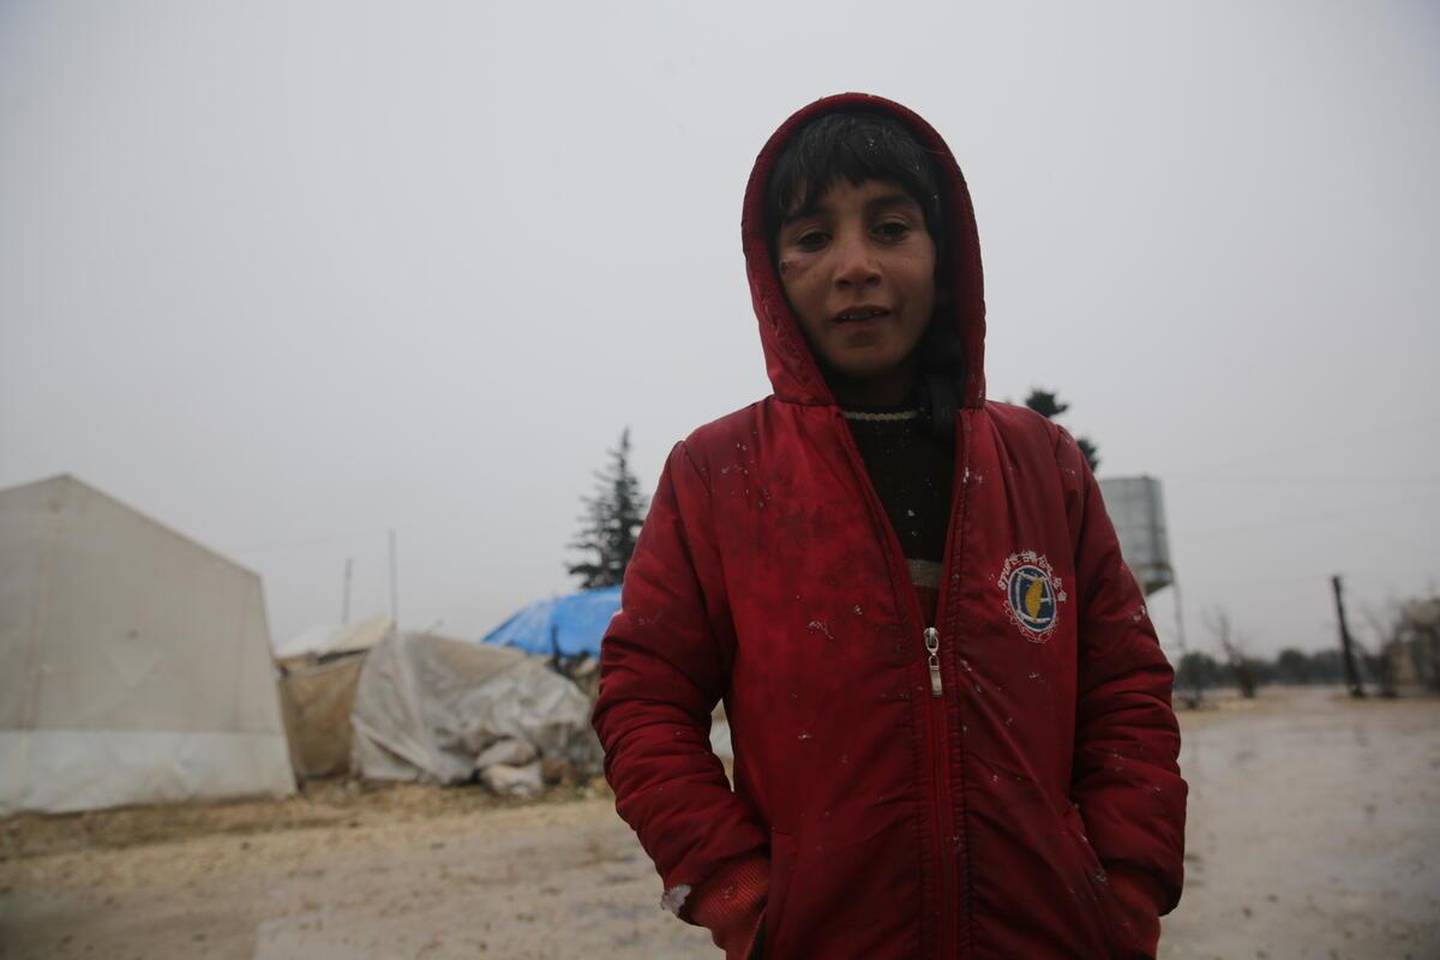 Asem*, 9 lives in a displacement camp in Eastern Aleppo.
The camp consists of around 300 families who have been displaced from various areas including Deir Ez-Zour, Idlib, Hama, Damascus and Homs.
There is one school in the camp and no health care centre or facility.

STRONG QUOTES
"I wish it would keep snowing instead of raining so we can play in the snow and not drown in the rain."